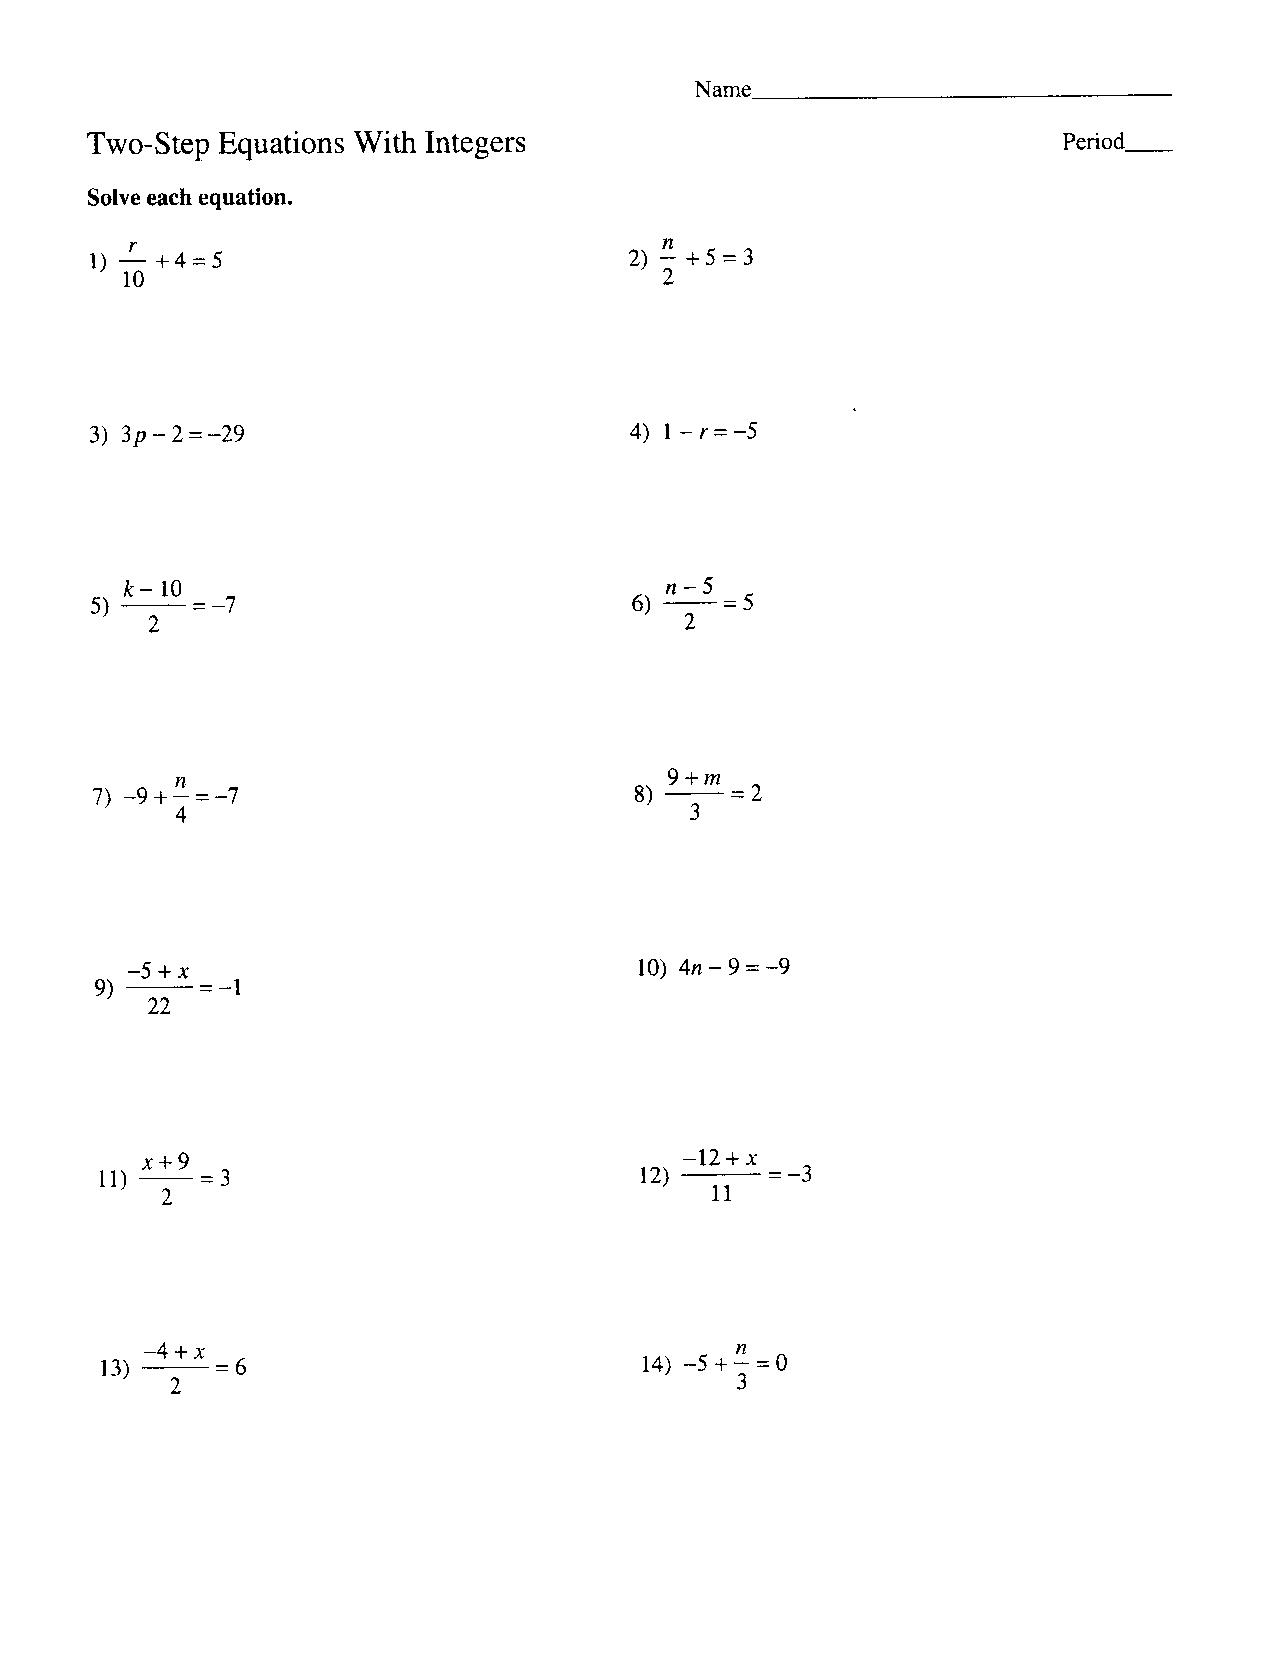 Two-Step Equations Worksheet Image